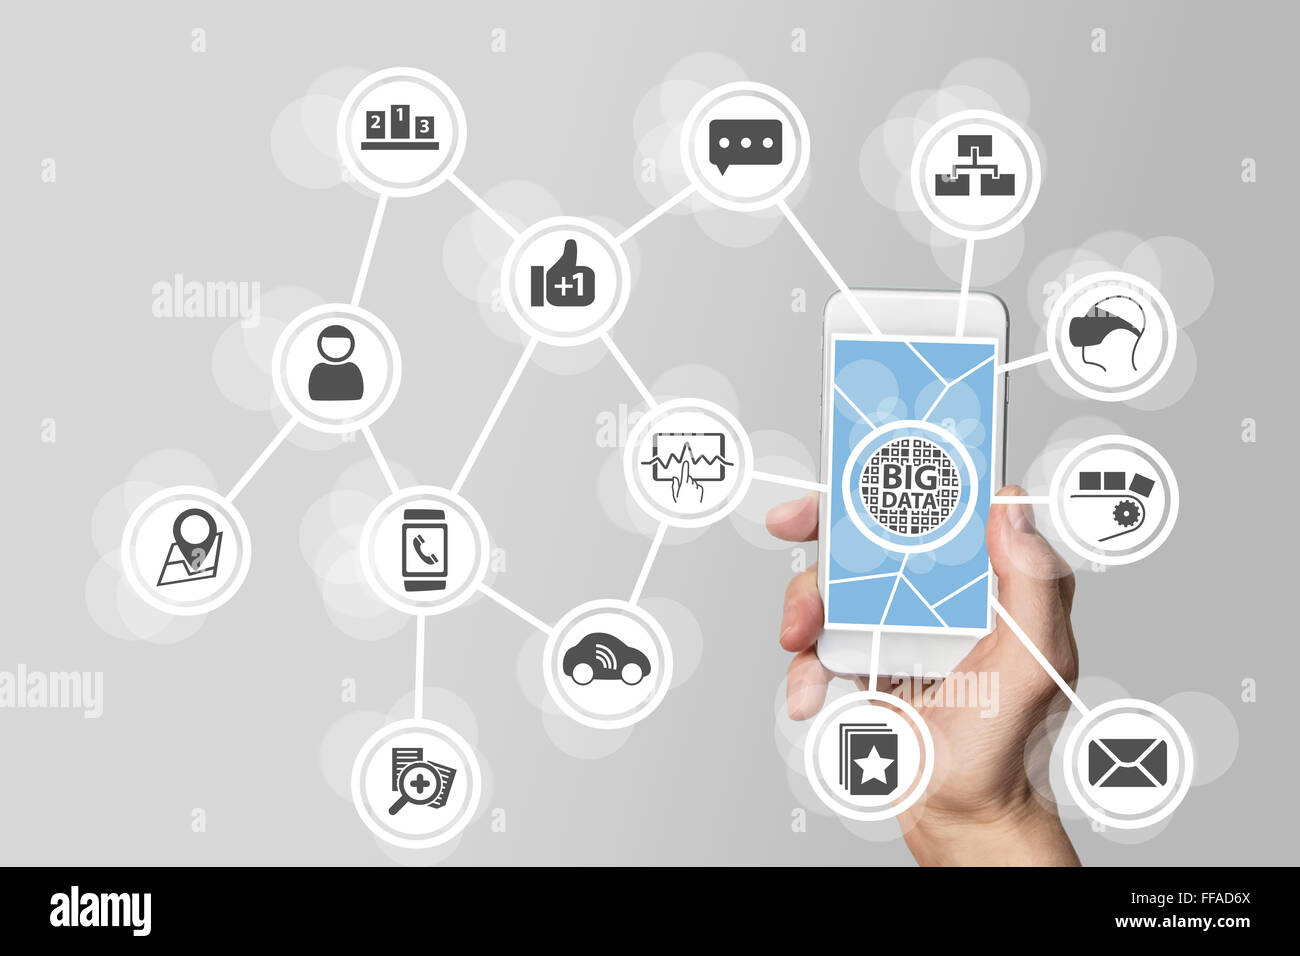 Big data concept in order to analyze large volume of data from connected mobile devices. Stock Photo